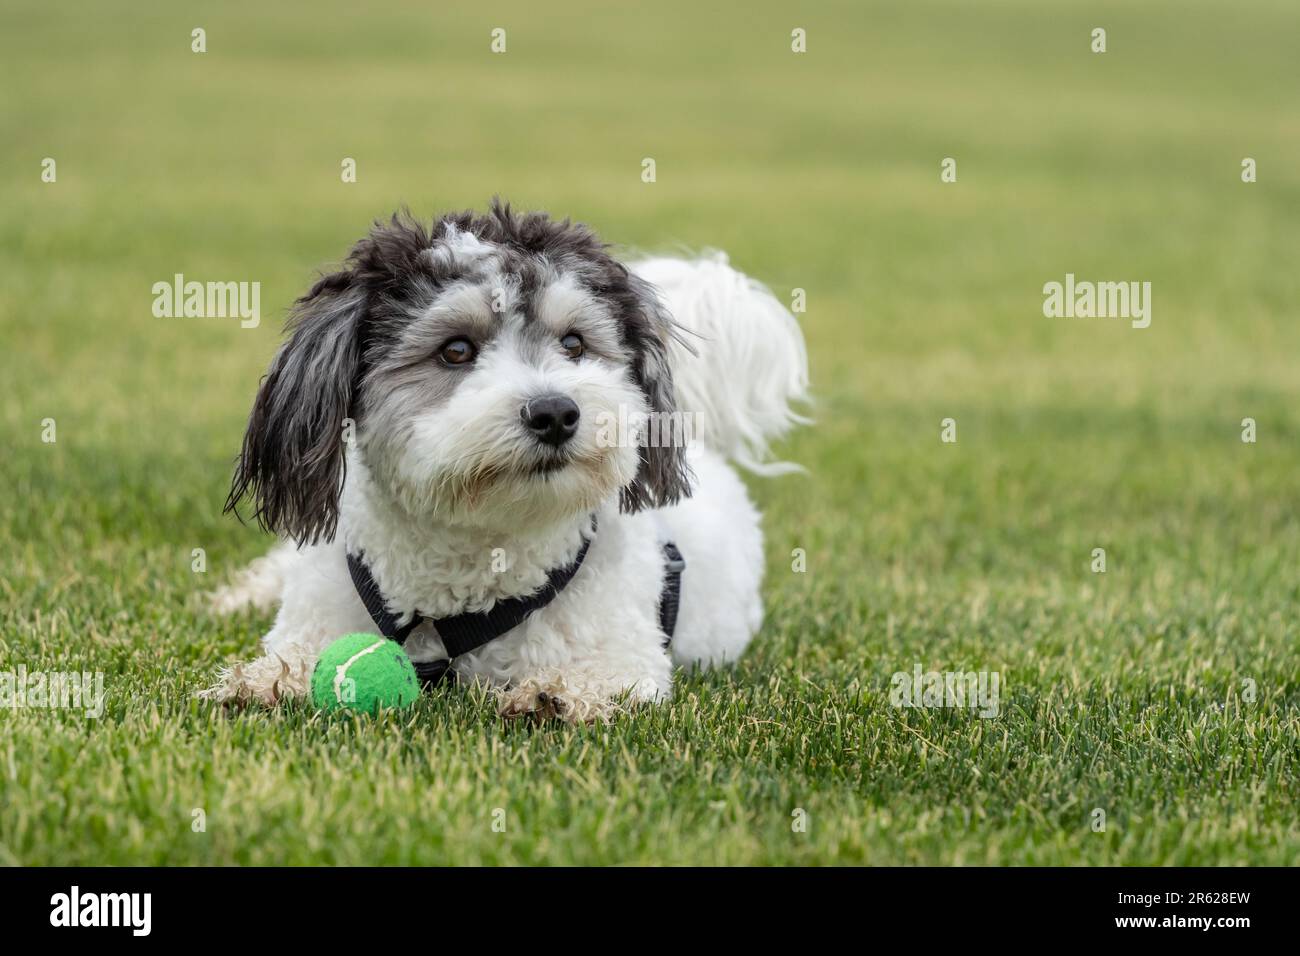 Black and White Havanese puppy playing fetch with green ball in backyard. Stock Photo